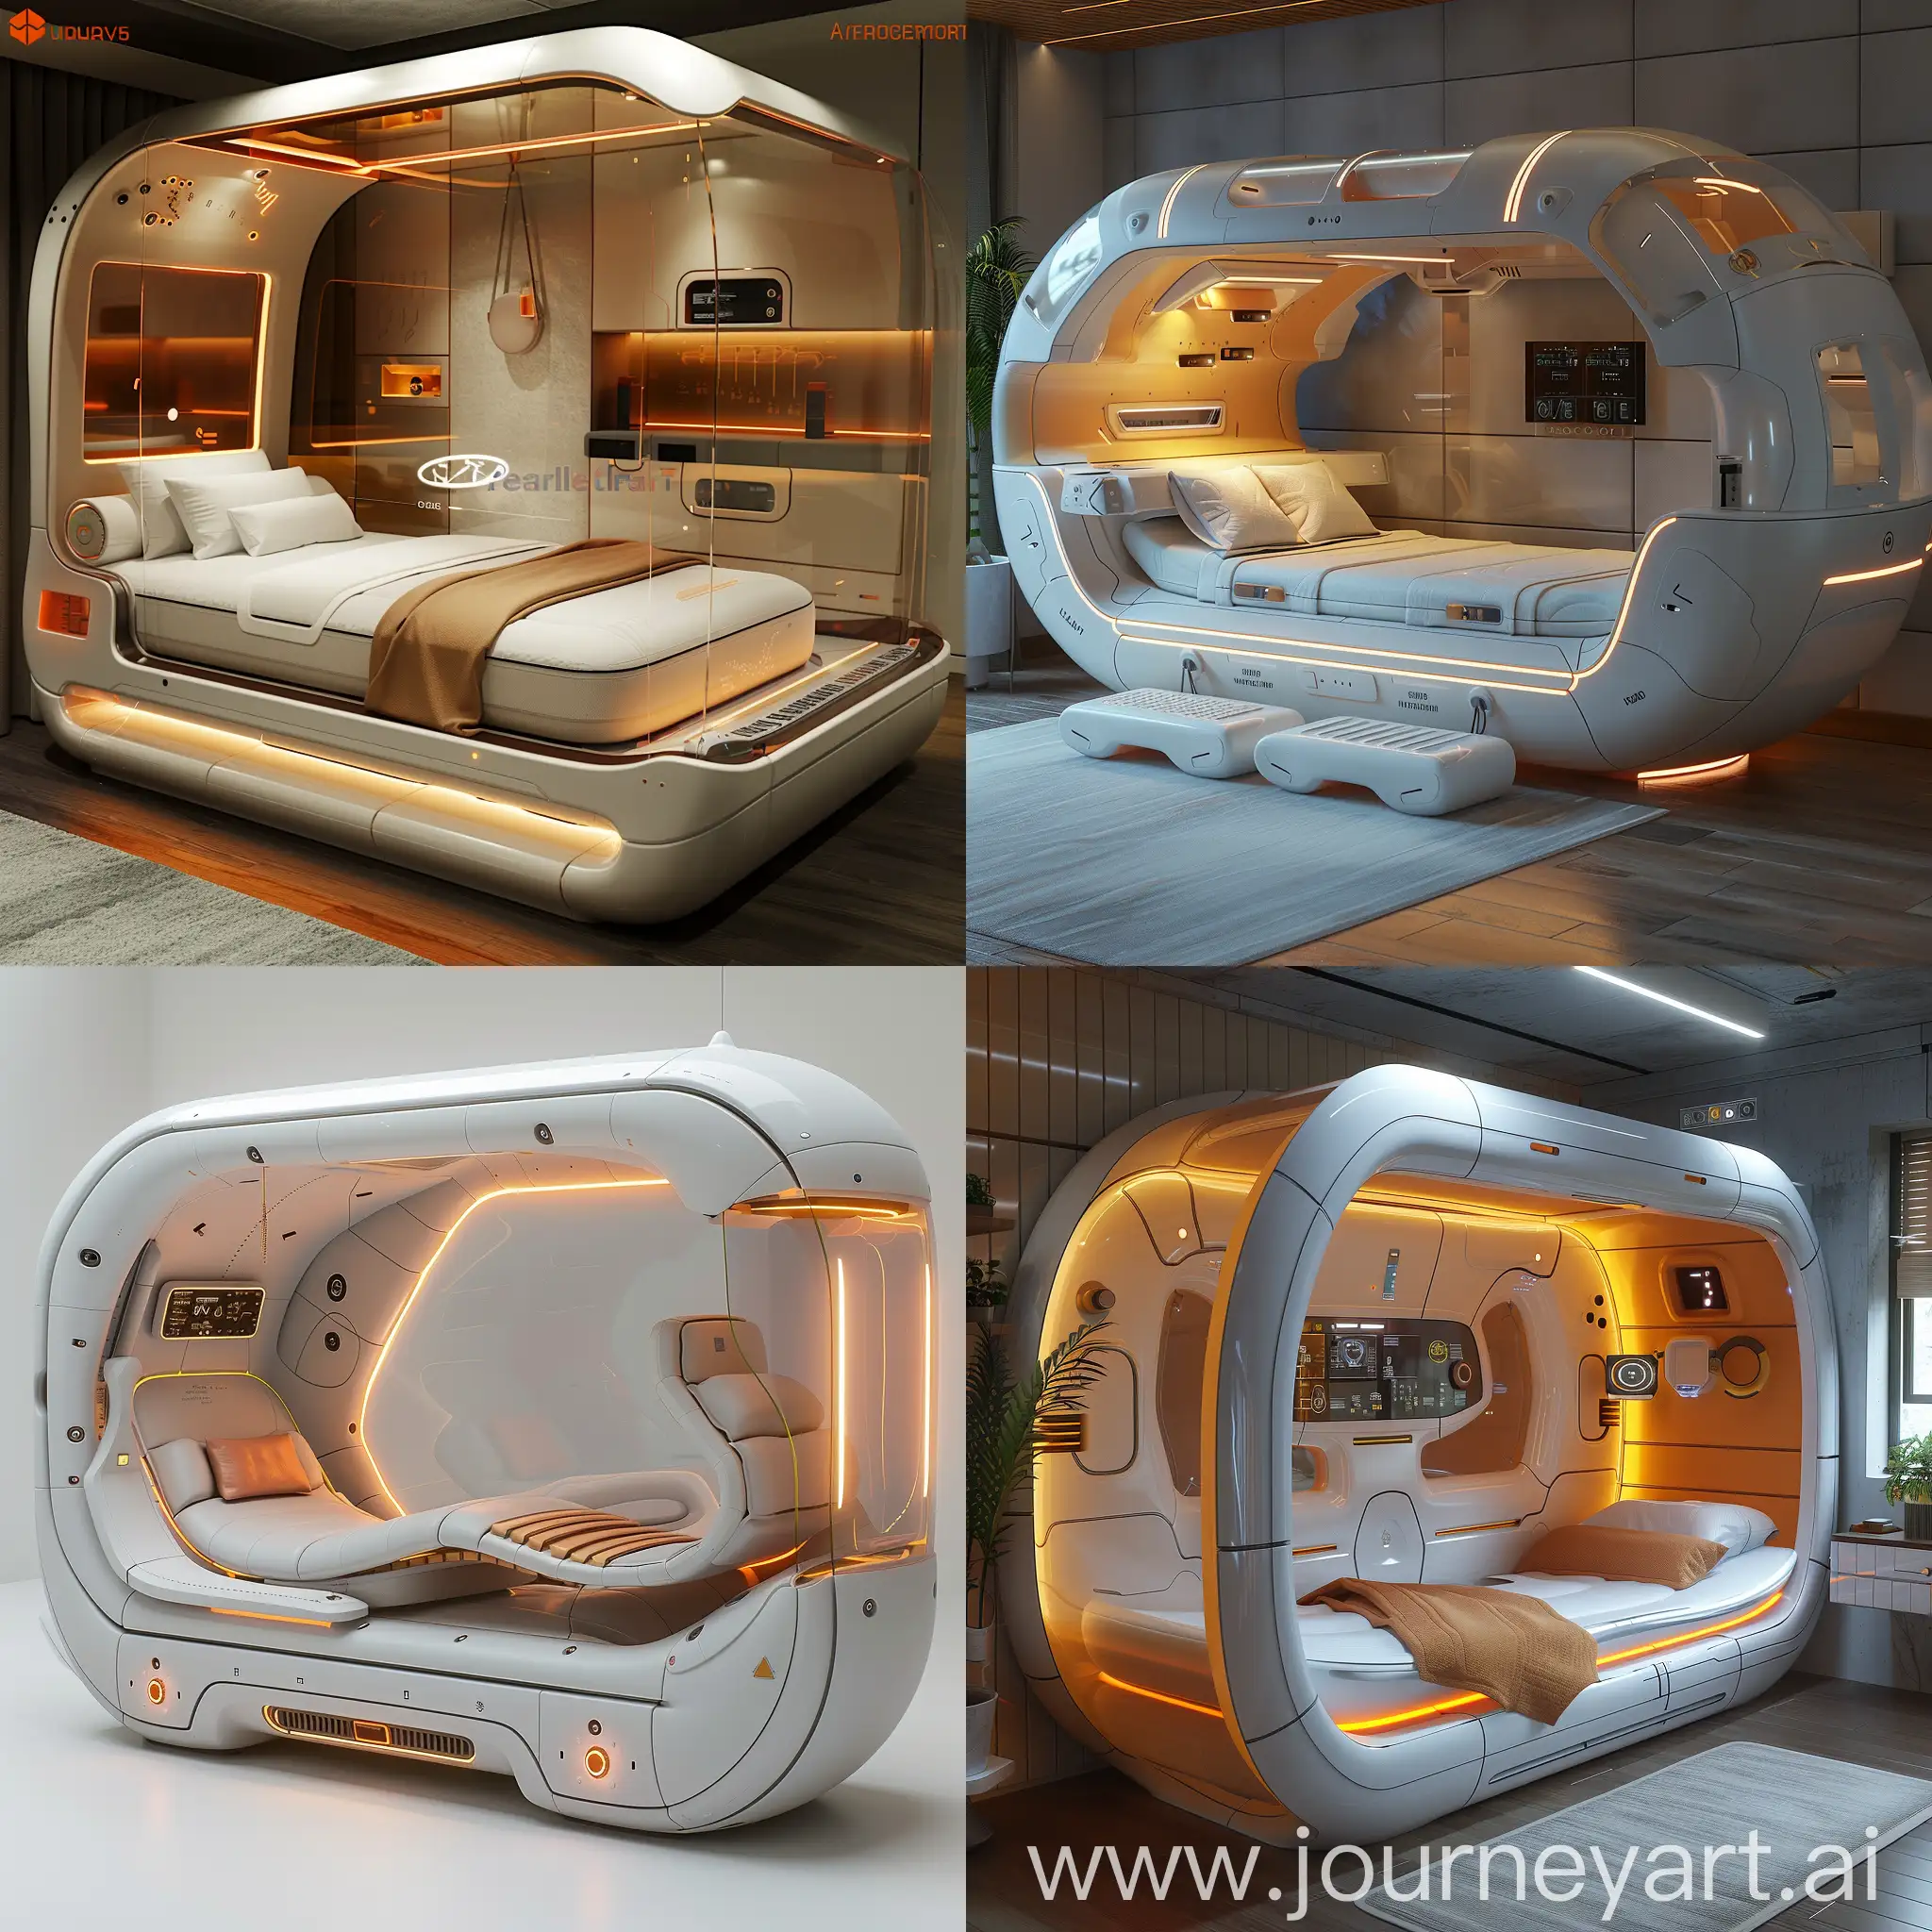 Futuristic-Smart-Bed-with-Adjustable-Firmness-and-Climate-Control